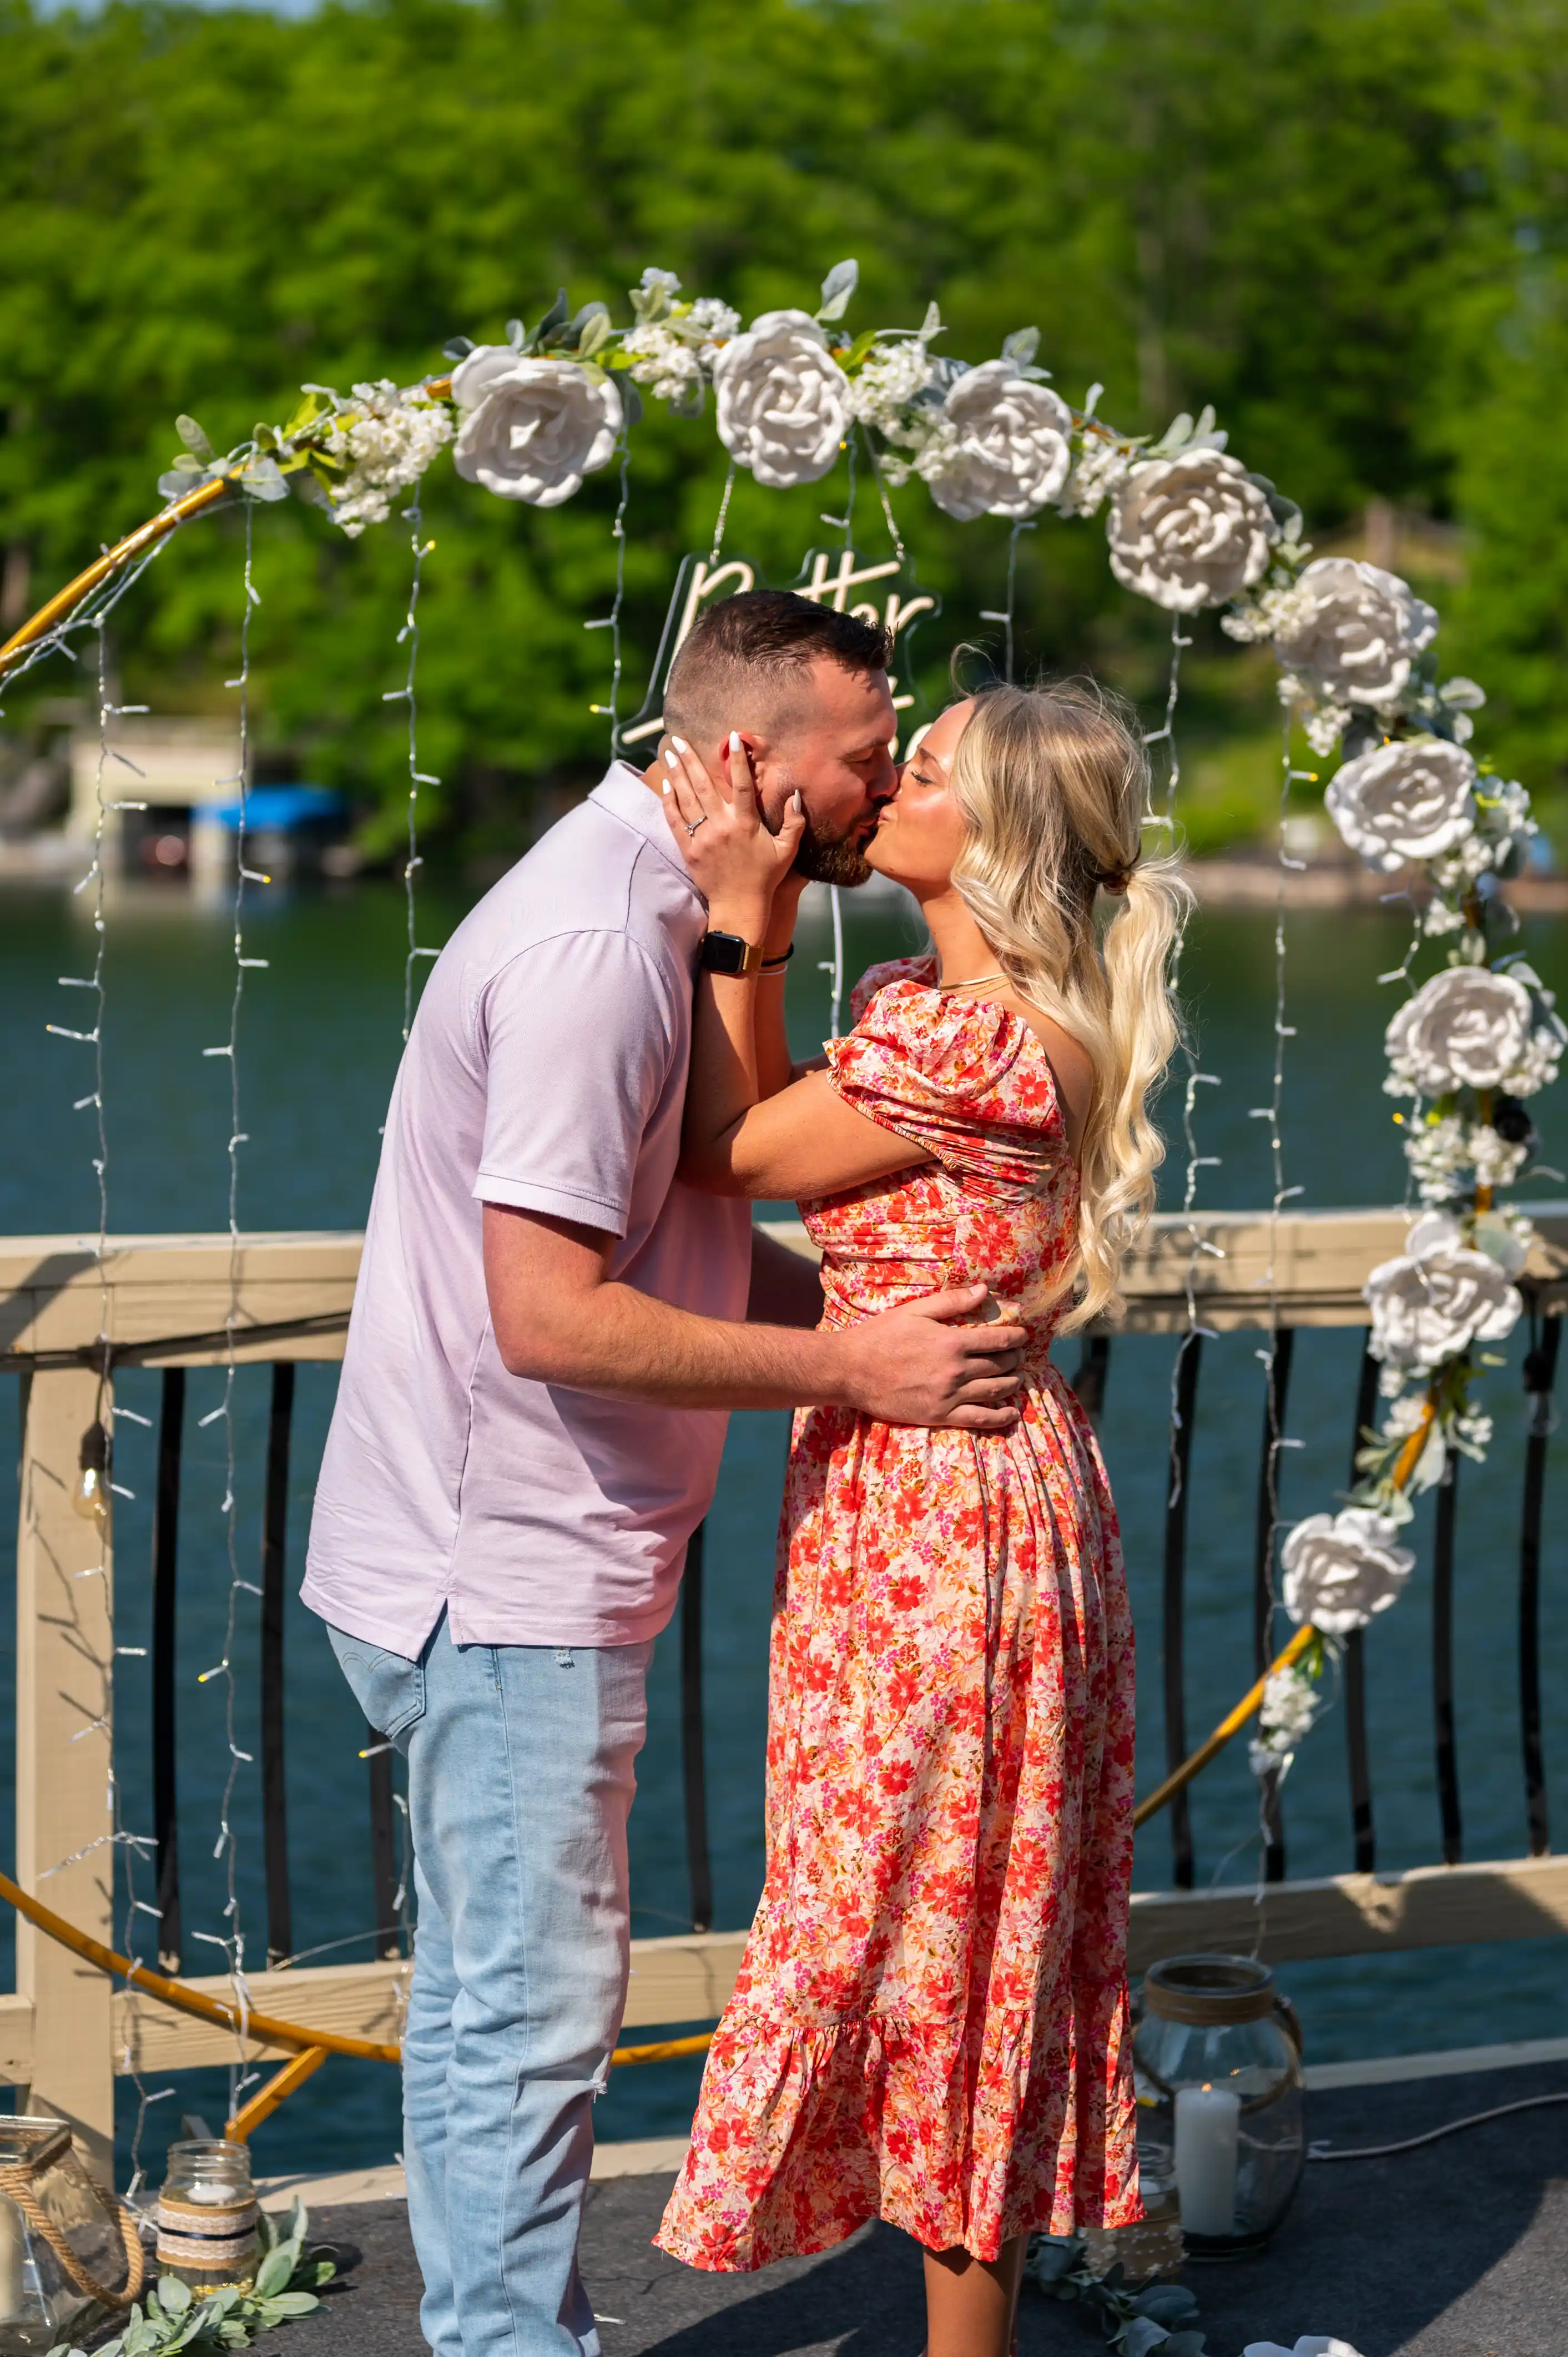 Couple kissing under a floral arch on a sunny day.